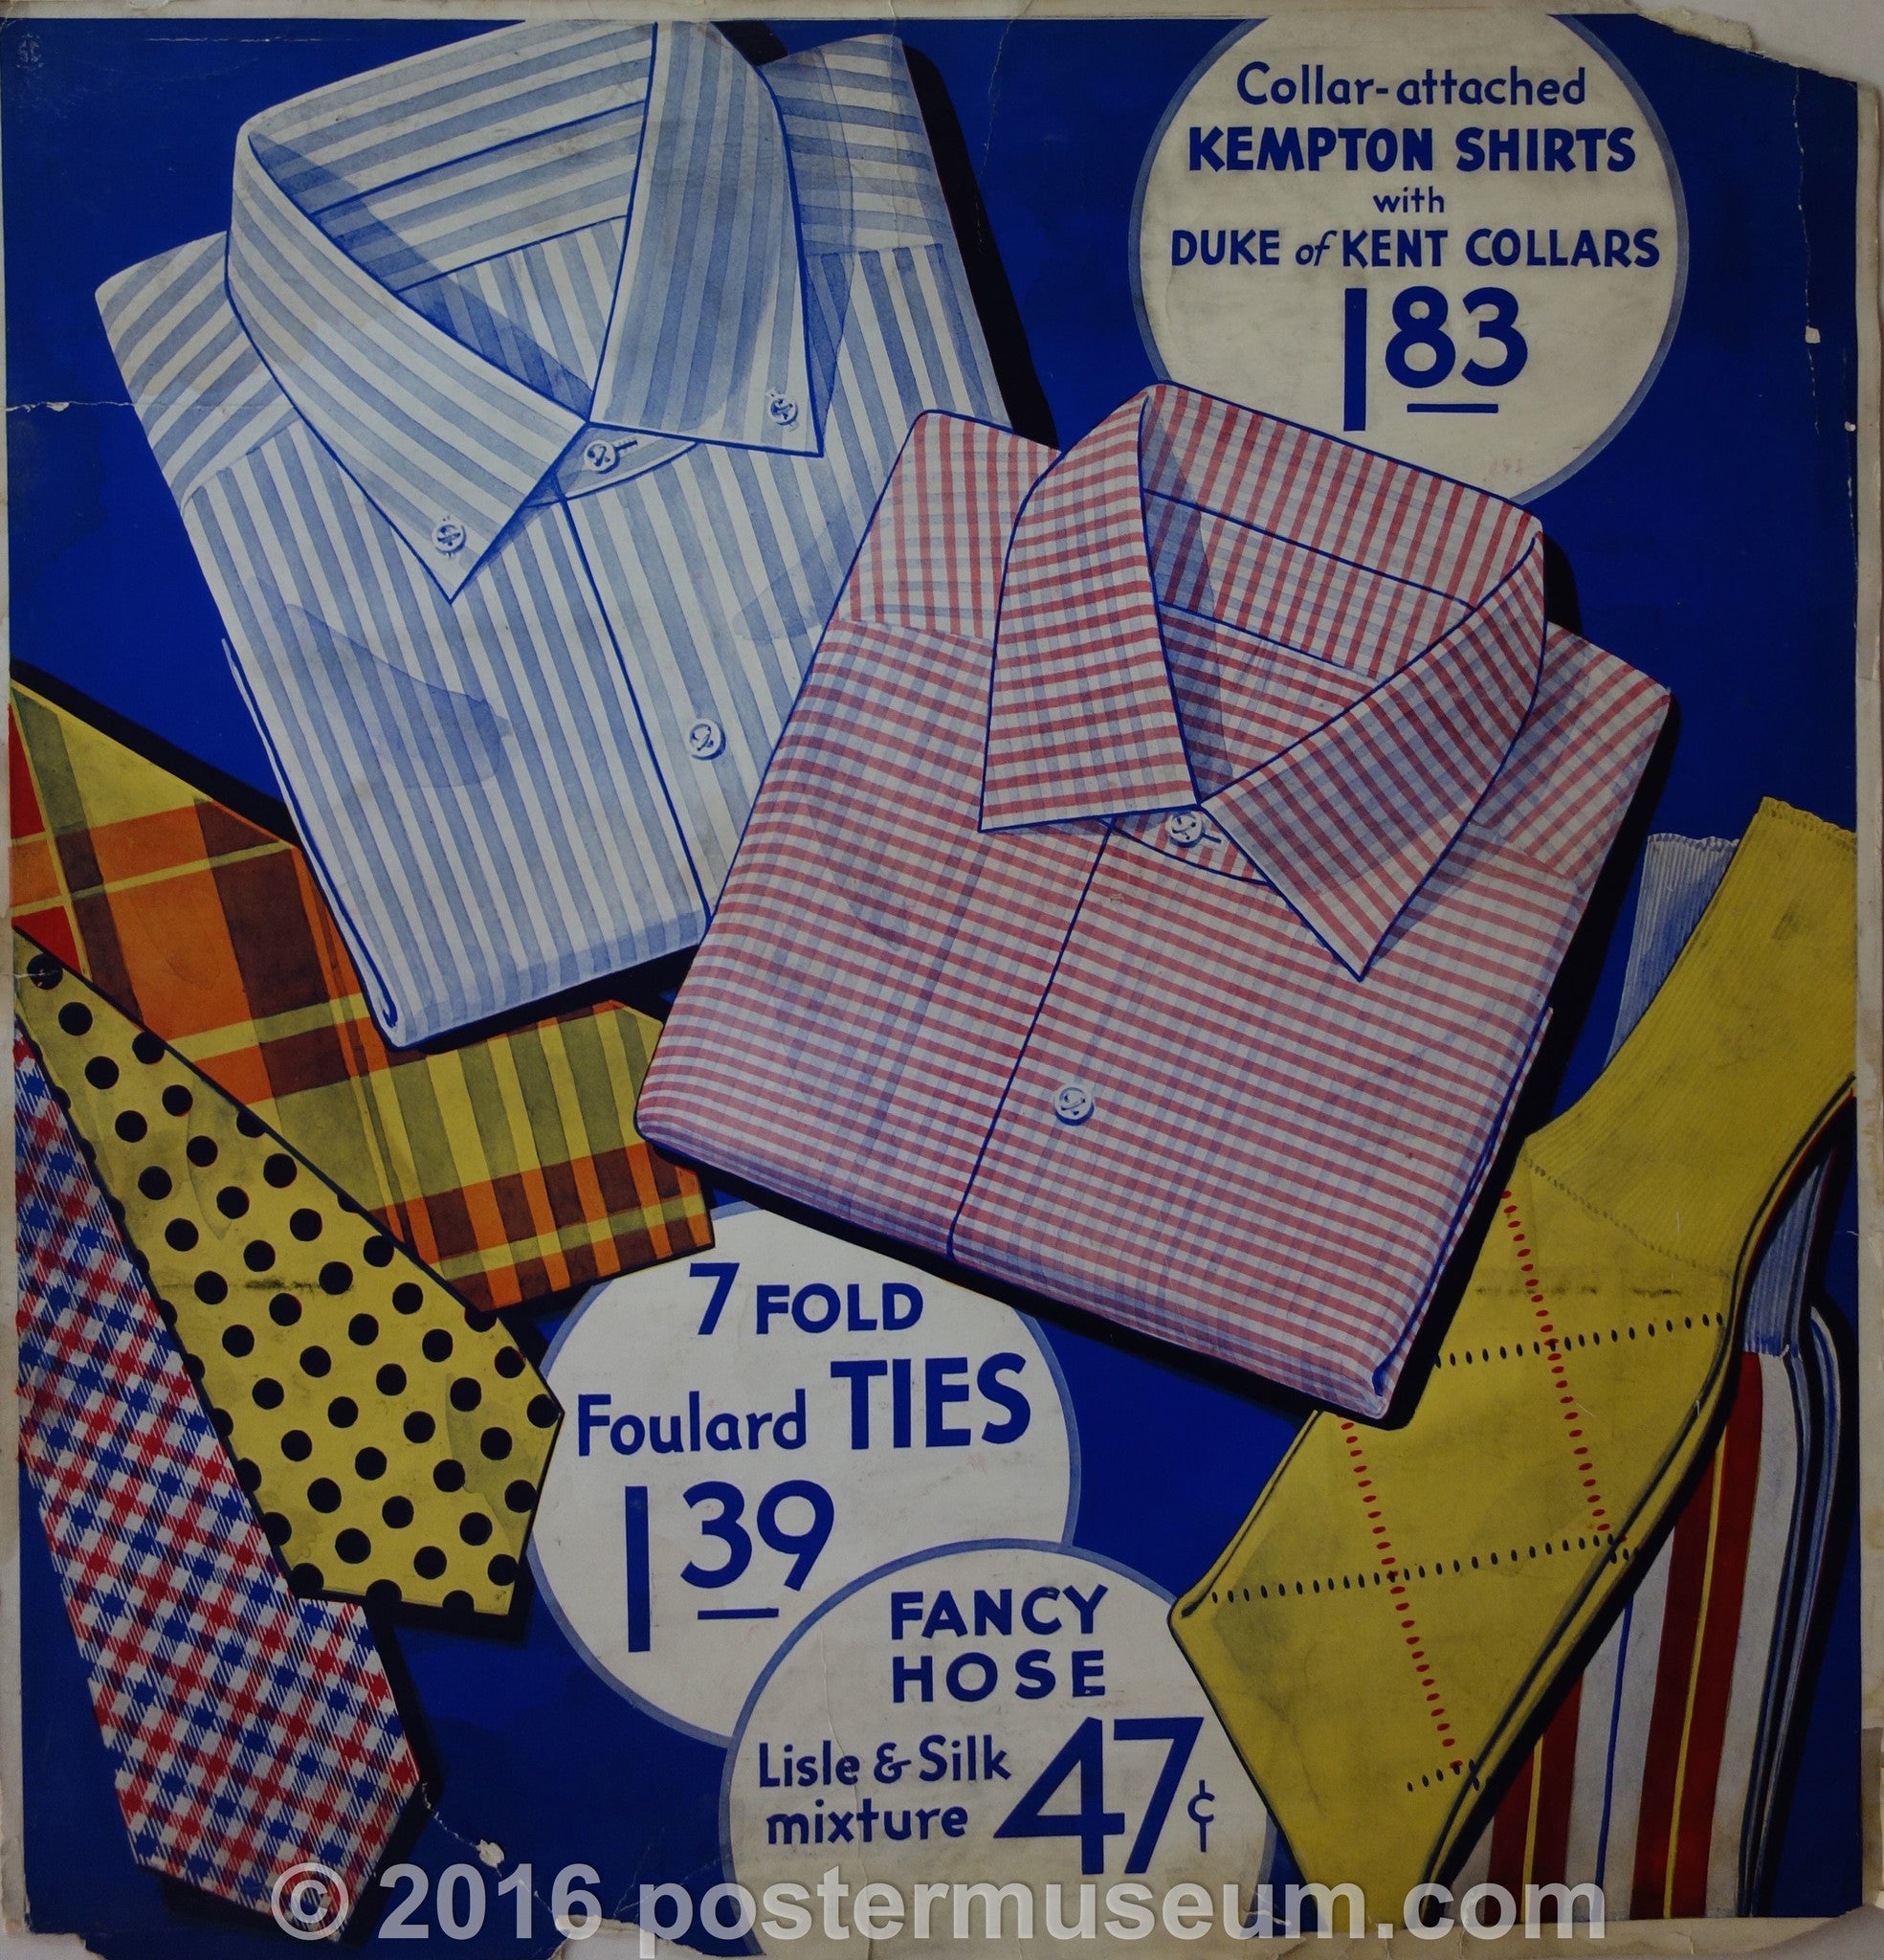 Collar-attached Kempton Shirts with Duke of Kent Collars